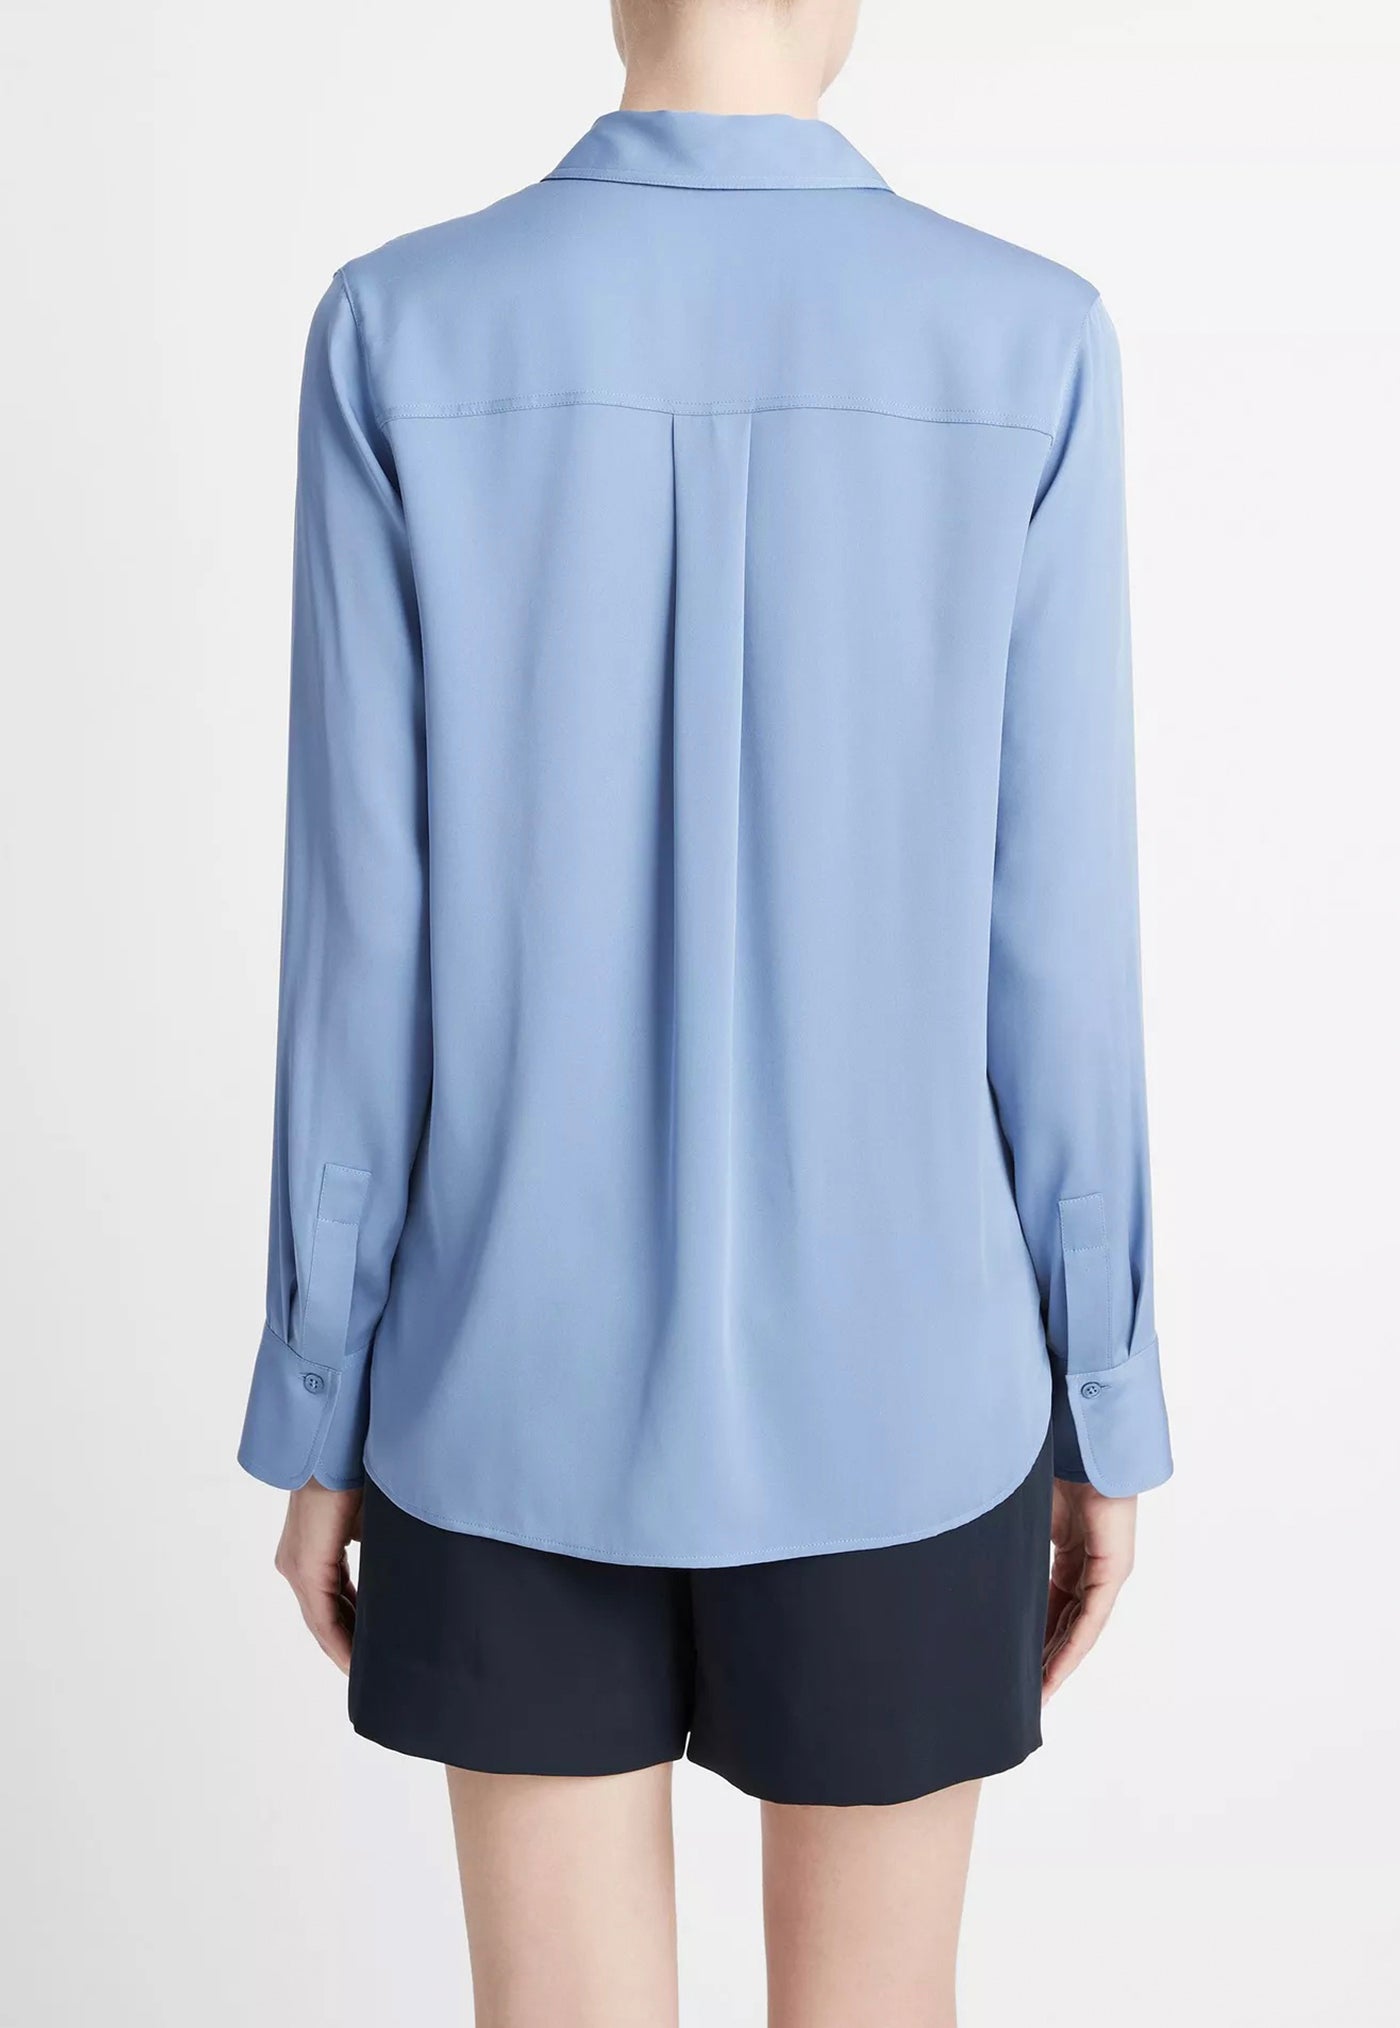 Slim Fitted Blouse - Azure Gem sold by Angel Divine